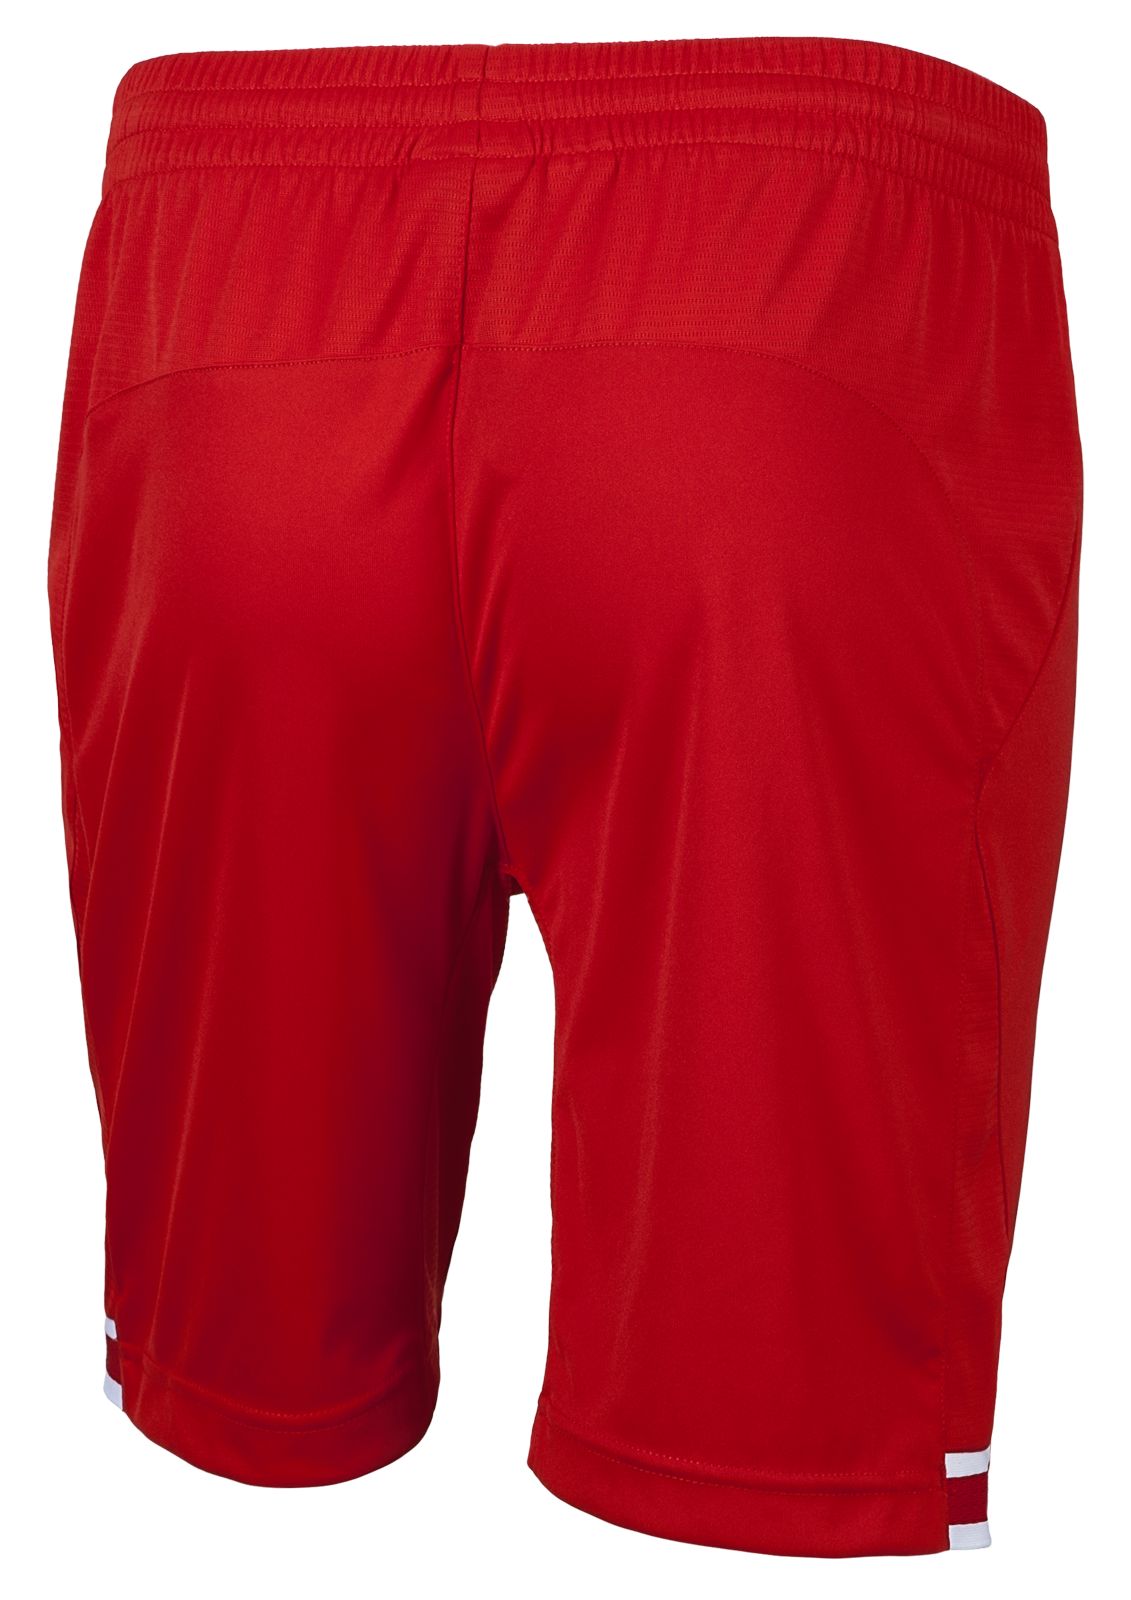 Liverpool Home Junior Short 2013/14, High Risk Red with White & Amber Yellow image number 0